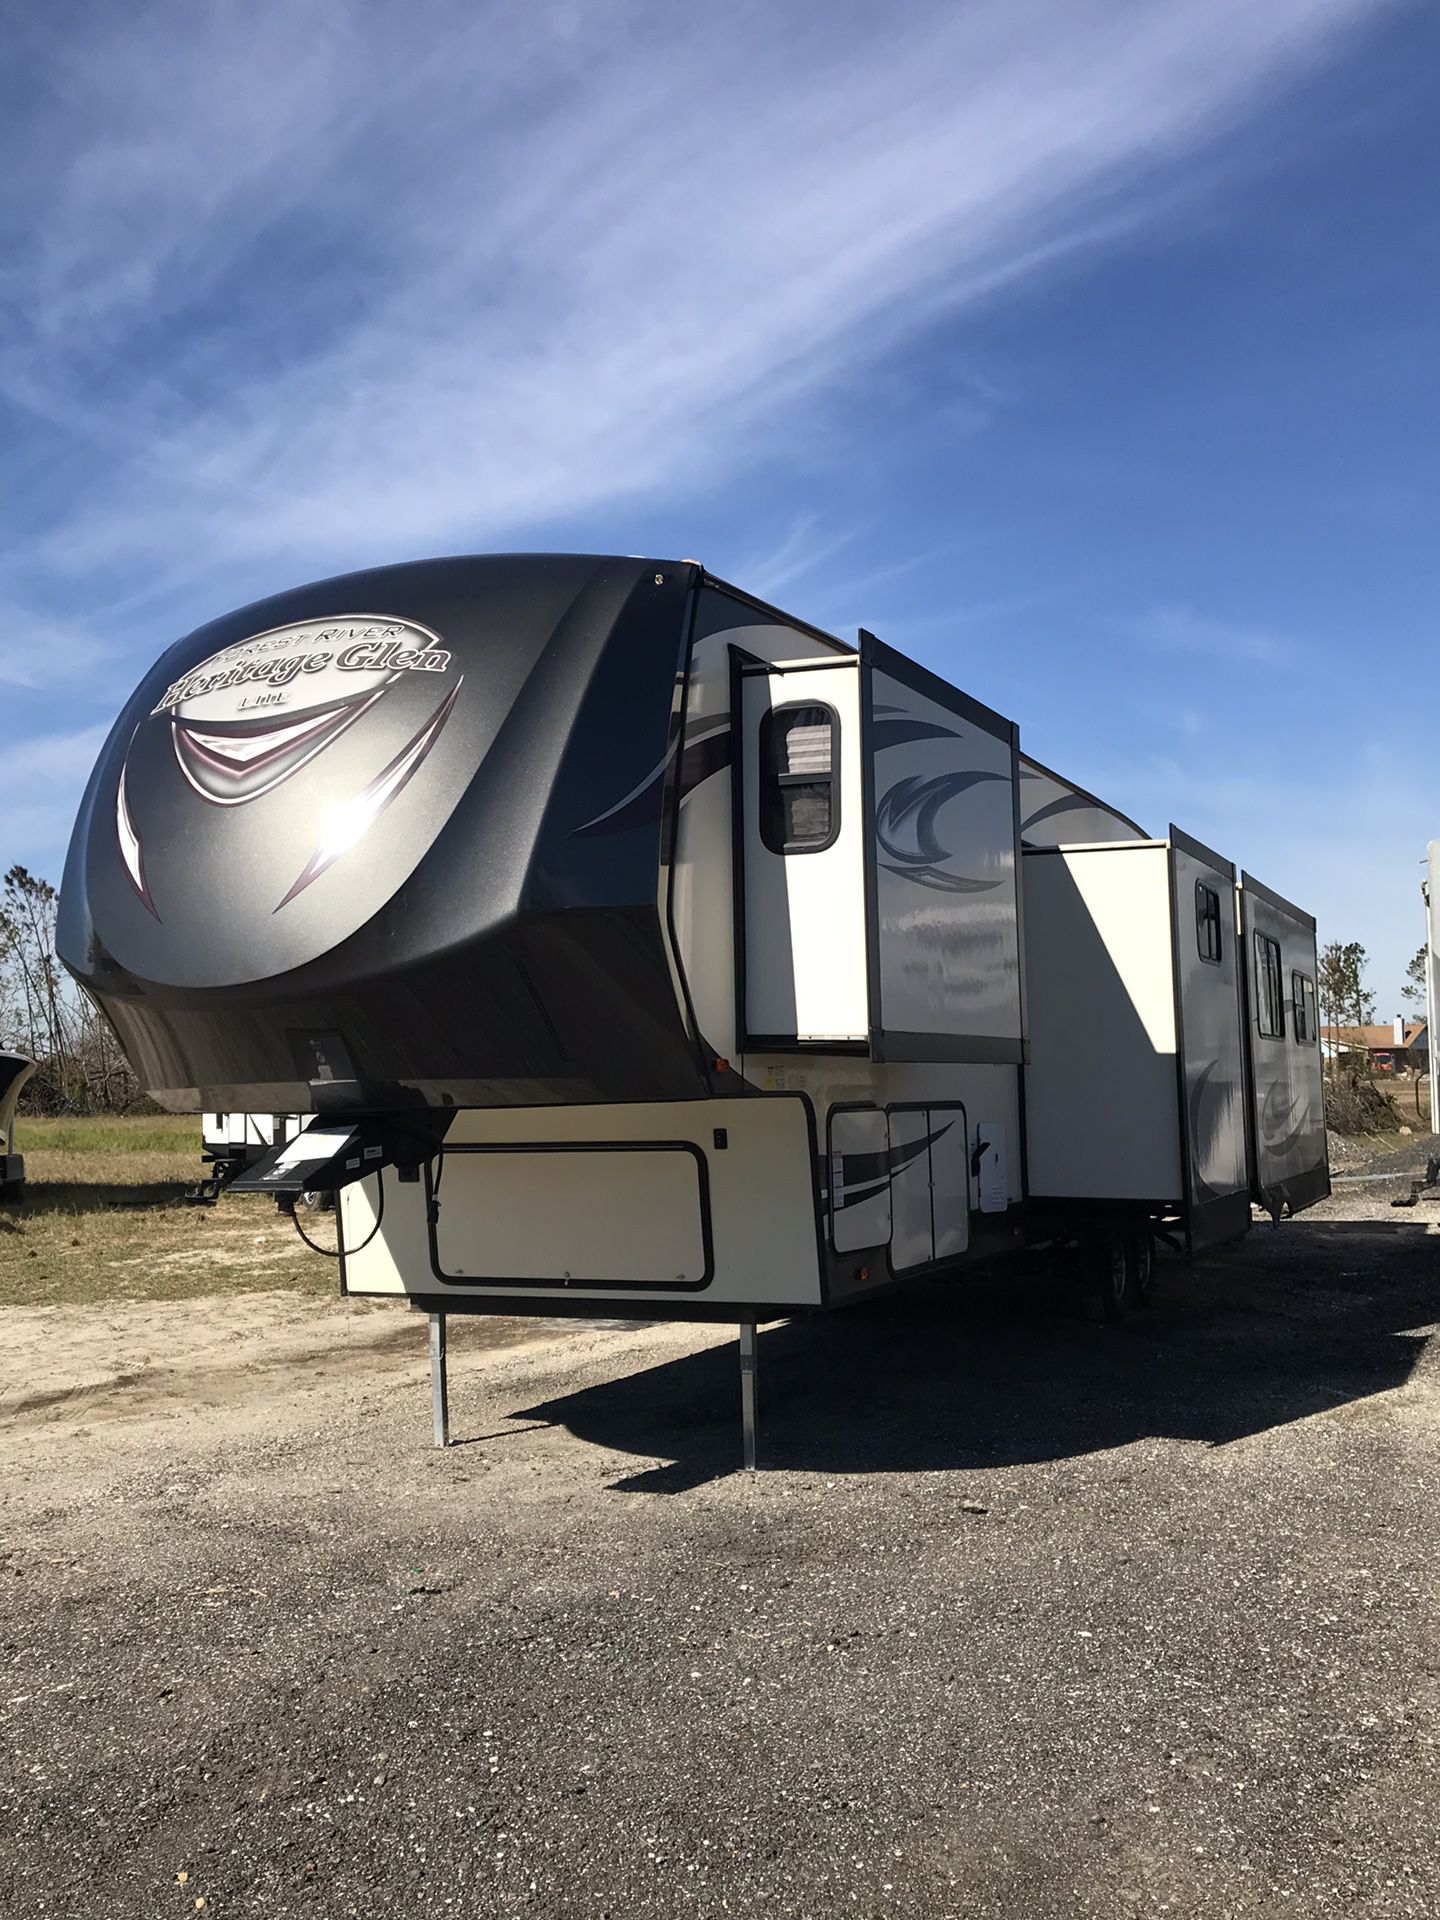 Travel Trailers for sale all types